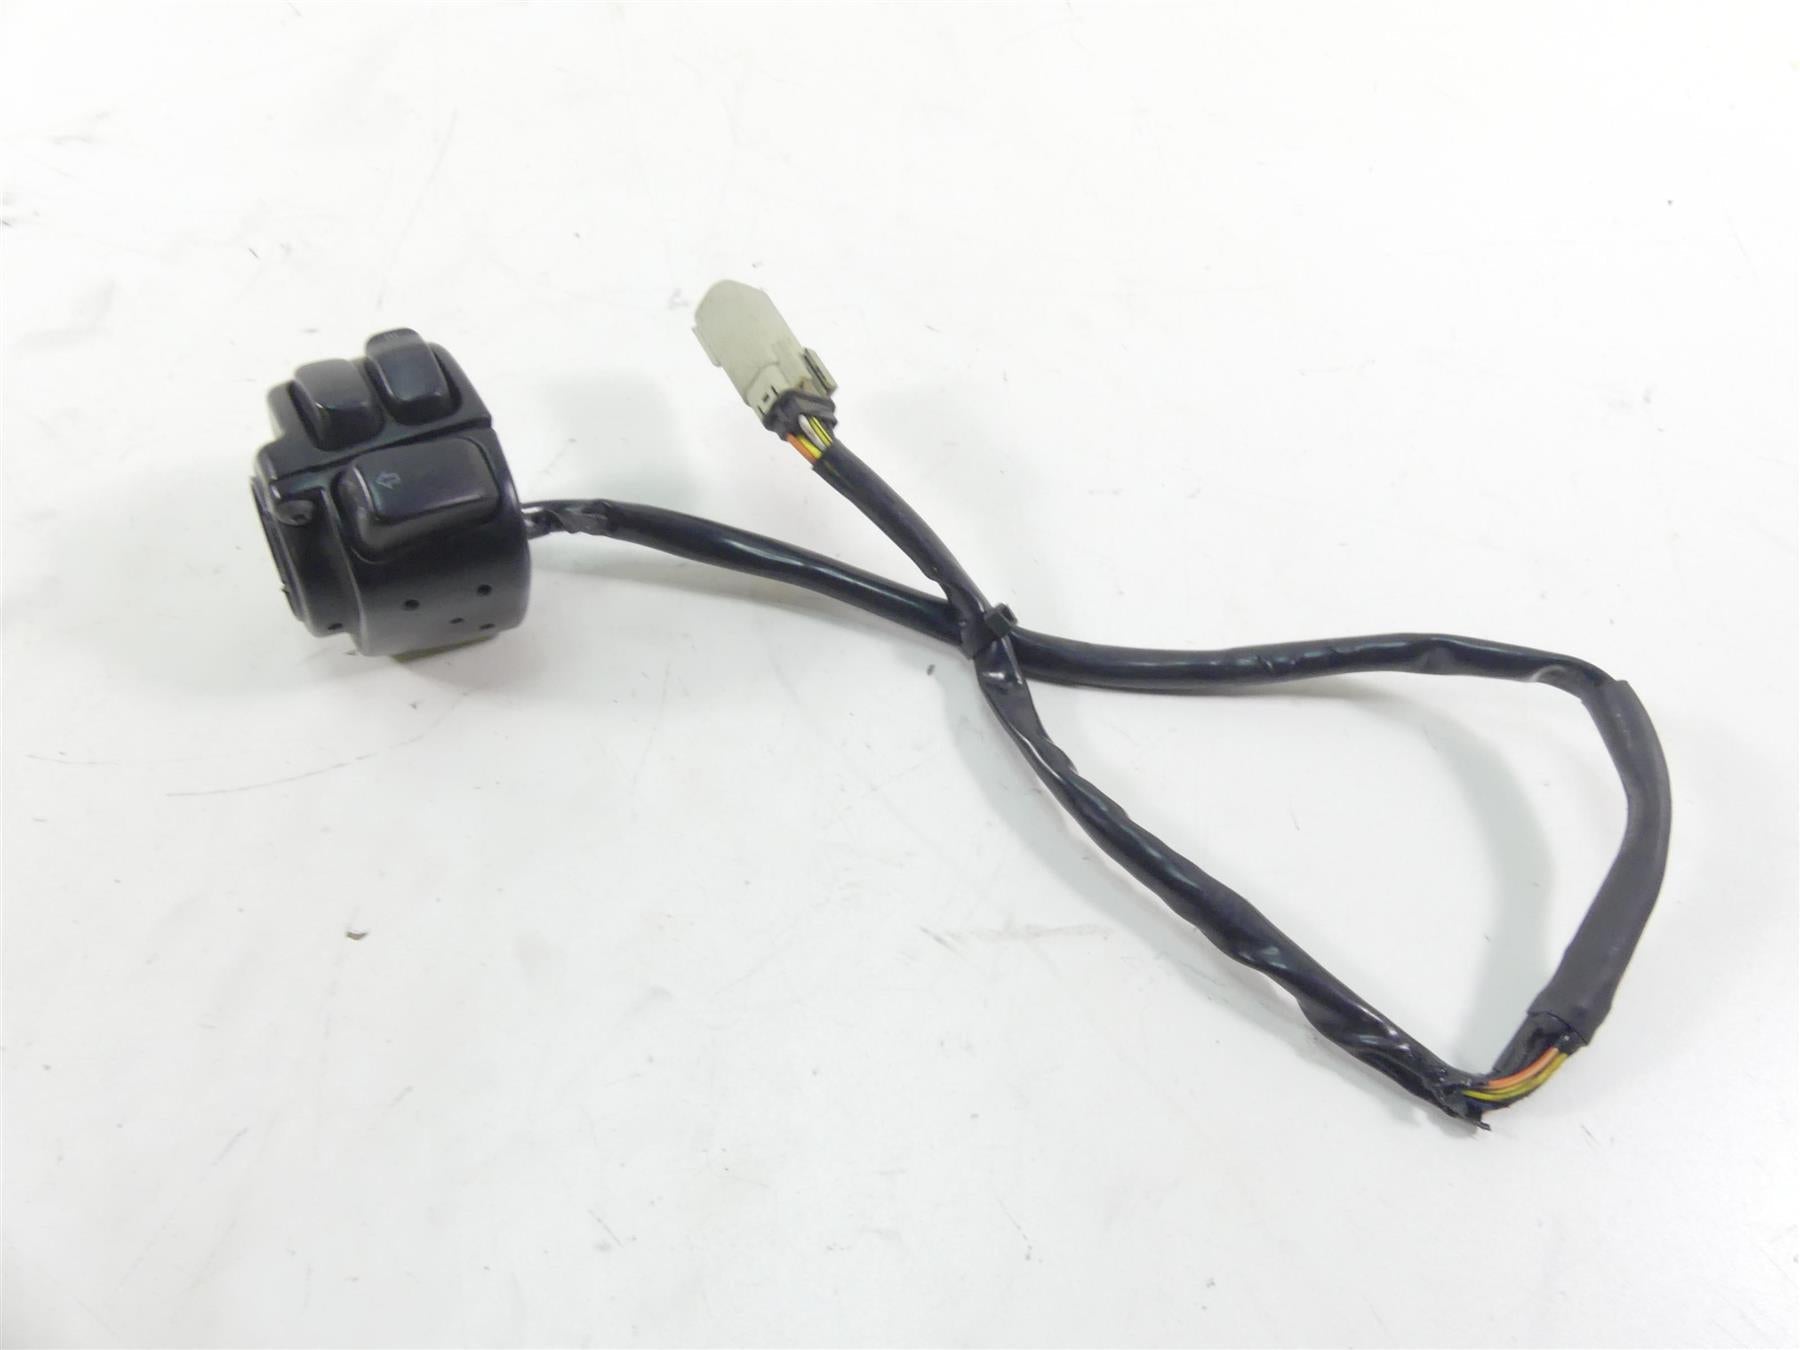 2009 Harley FXDL Dyna Low Rider Left Hand Light Blinker Control Switch  71682-06A